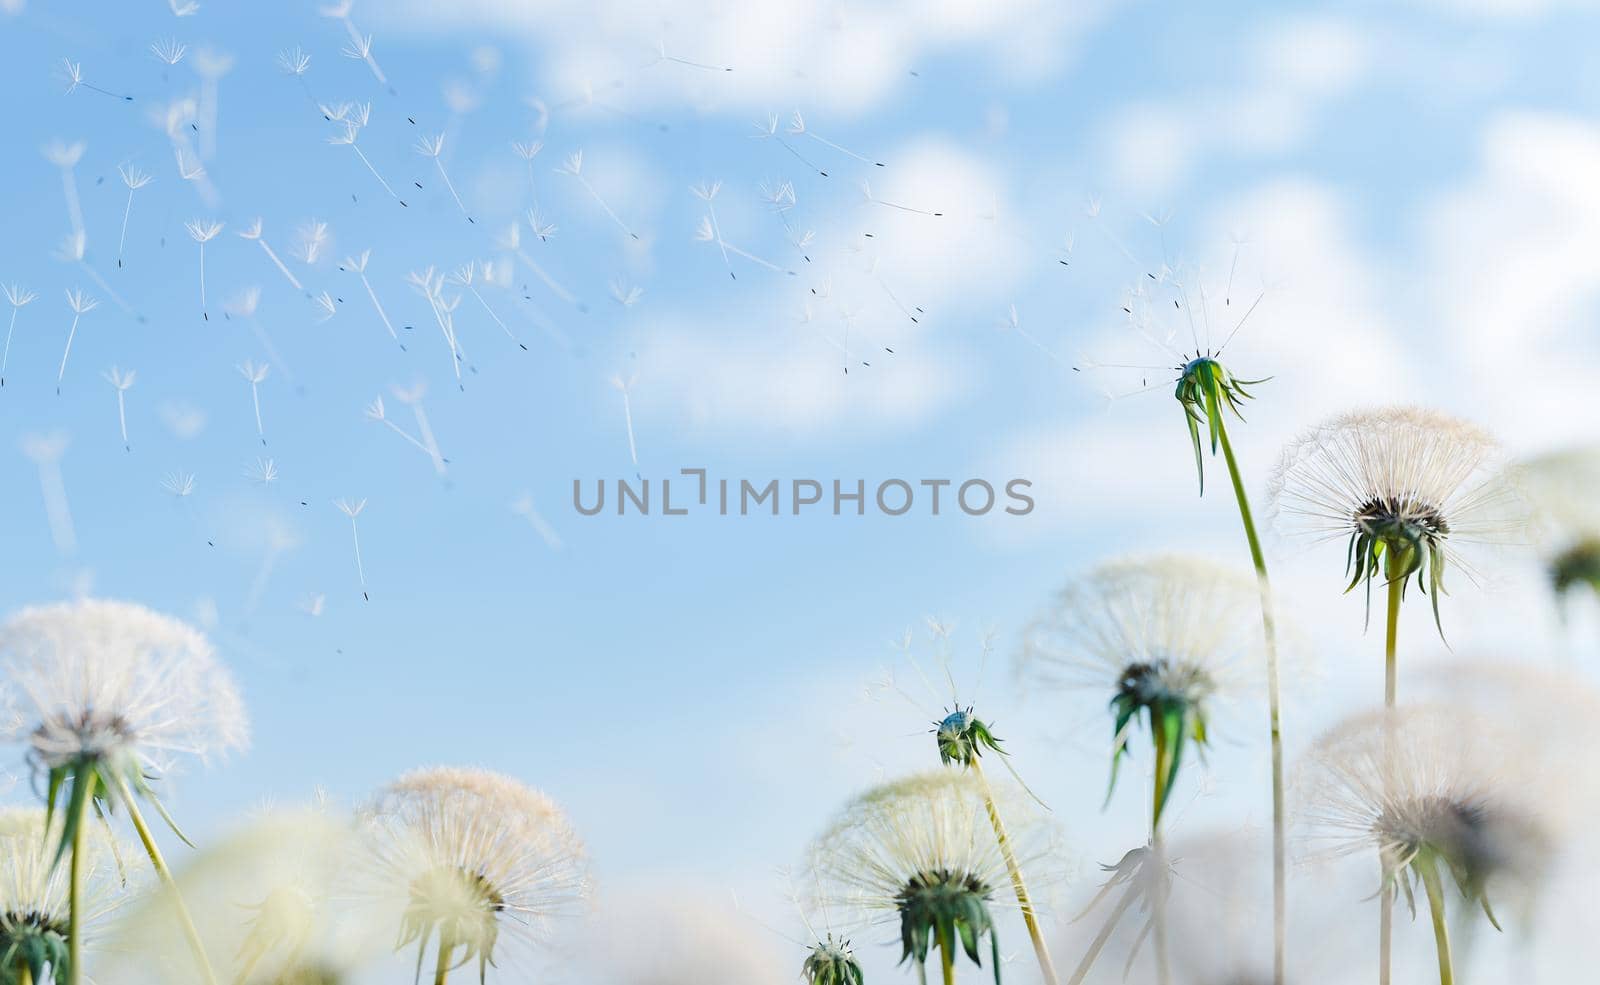 close-up of dandelions dropping seeds and unfocused sky in the background. 3d rendering